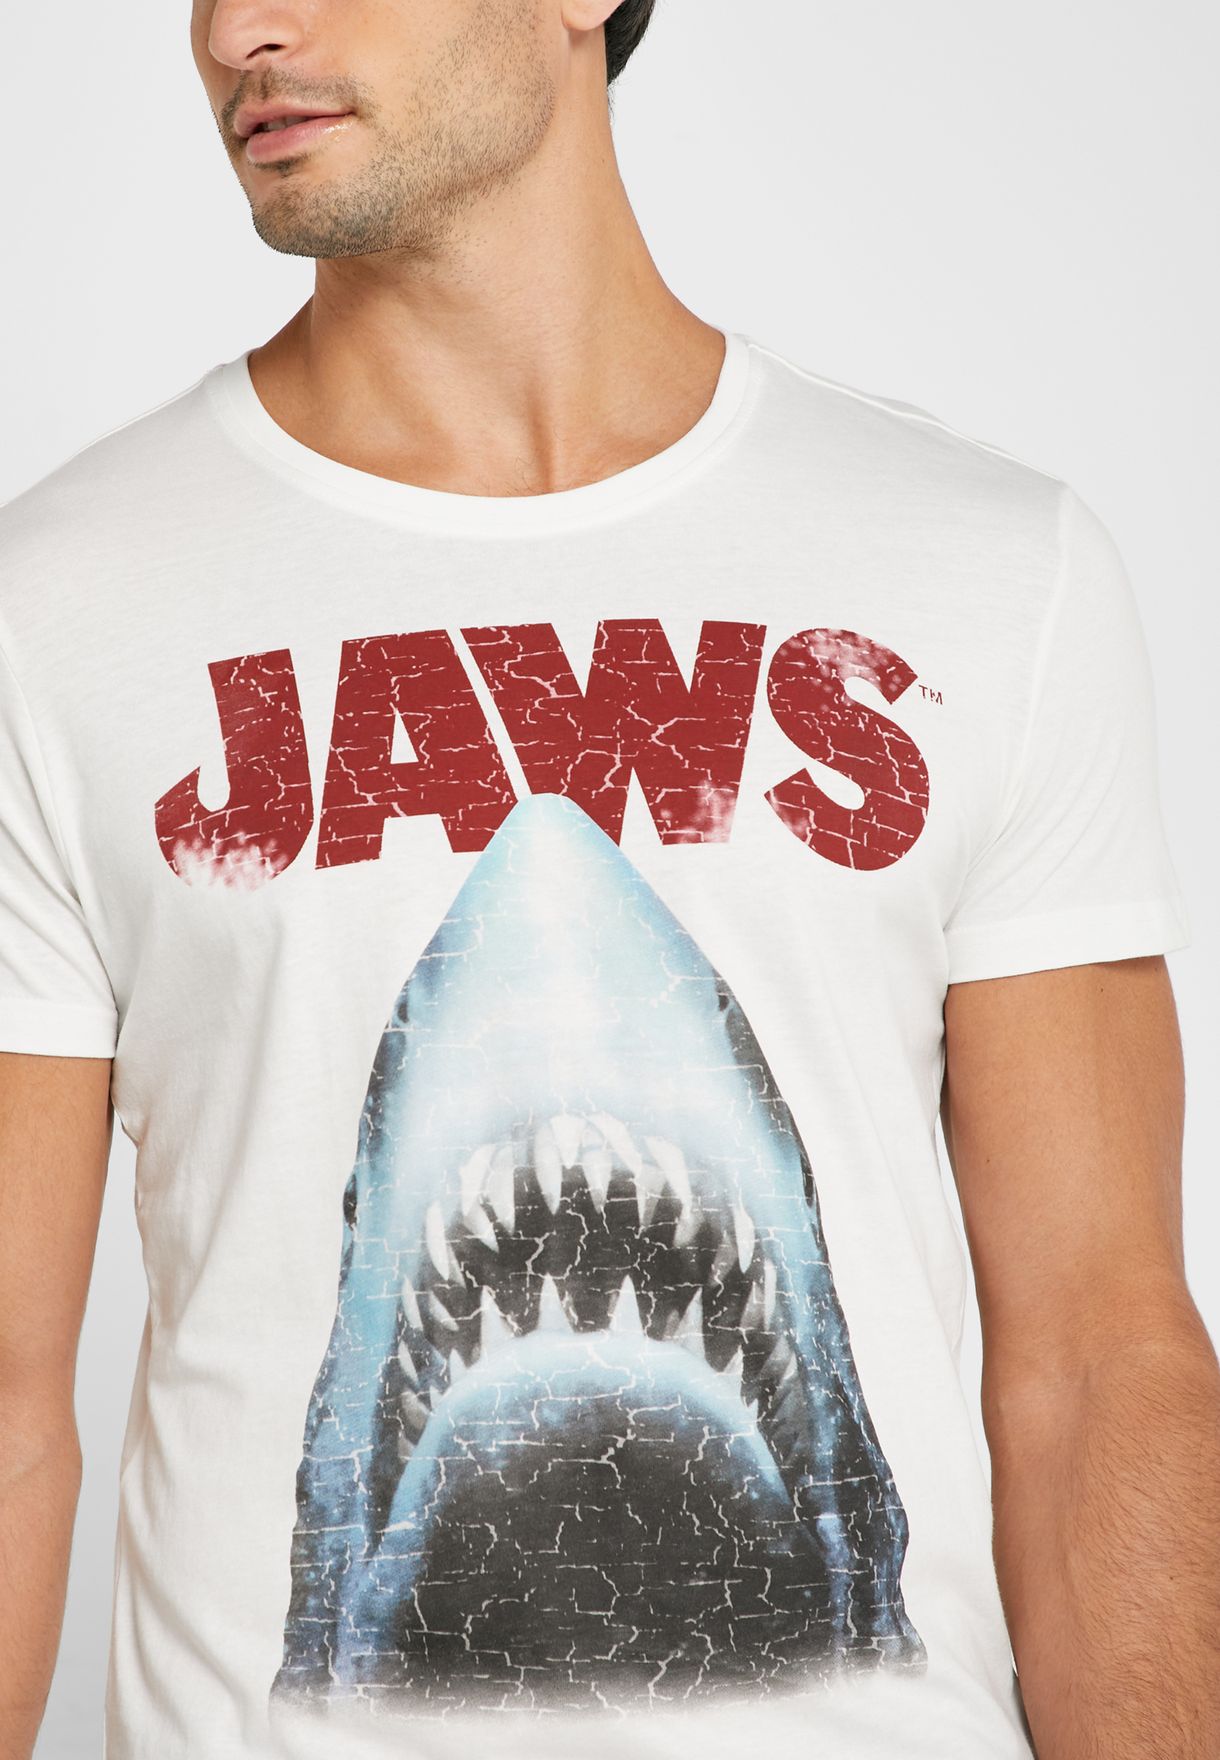 Jaws Poster Crew Neck T-Shirt